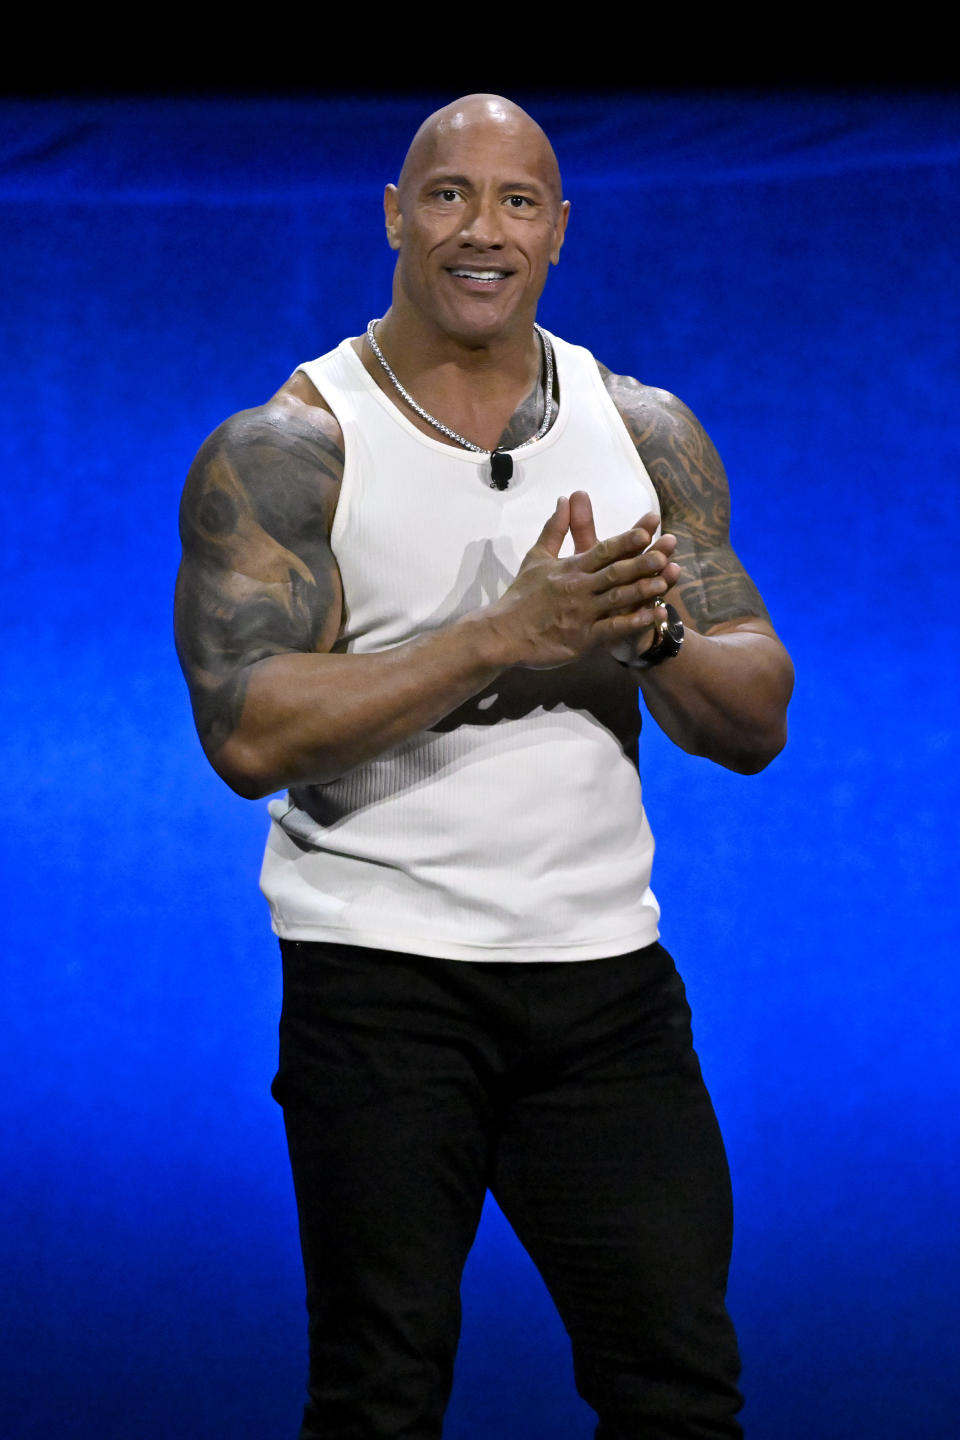 Dwayne "The Rock" Johnson stands with clasped hands, wearing a sleeveless white shirt and black pants, showcasing his tattooed arms